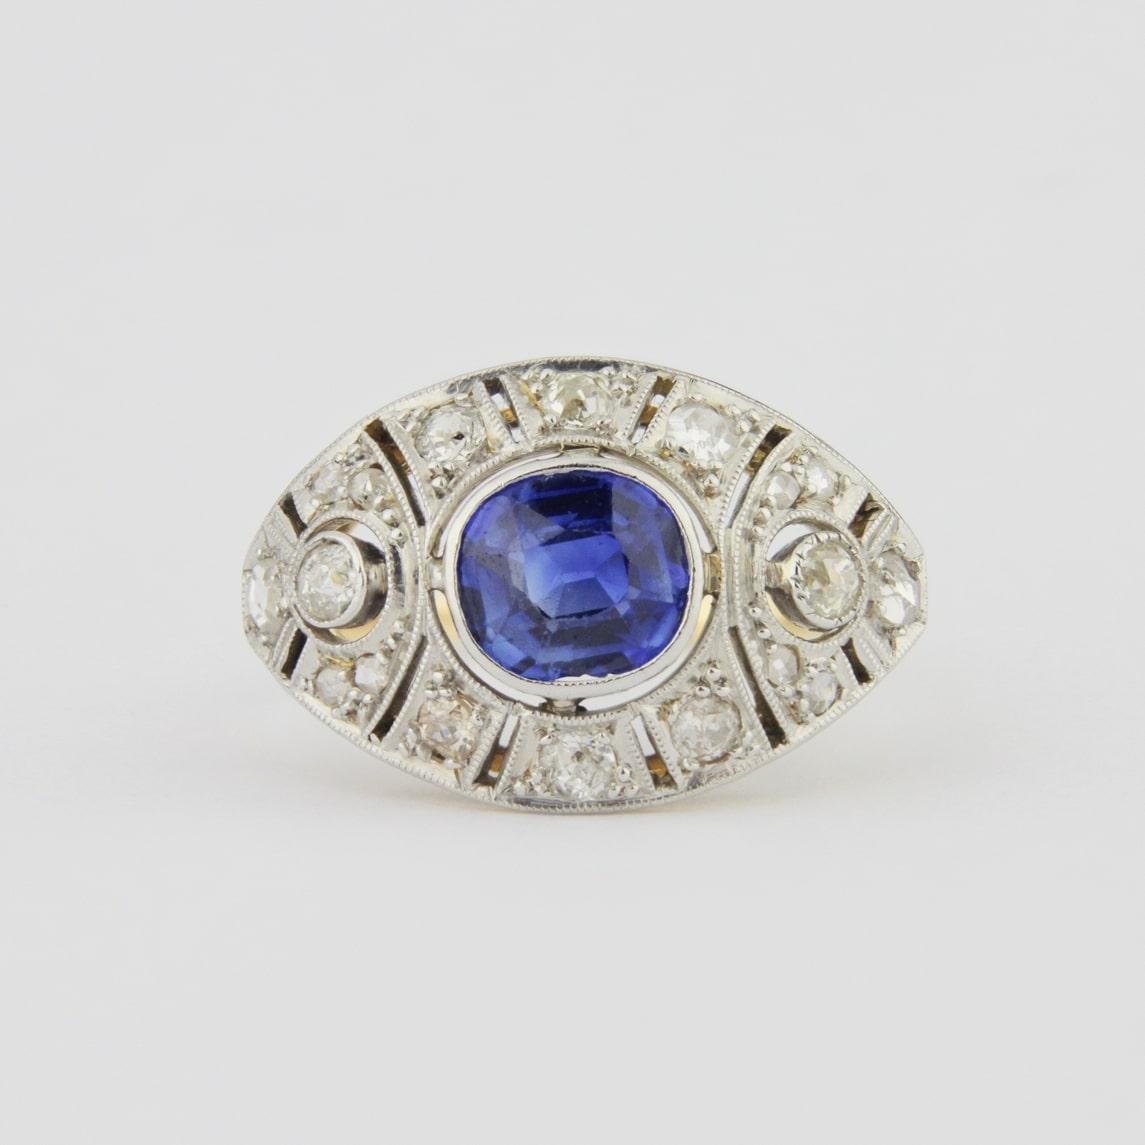 An original Art Deco ring with diamonds and a central Ceylon sapphire set in 18 karat gold. This impressive ring likely dates to the 1930s and whilst unmarked has been tested as 18 karat gold. The central cushion cut Ceylon sapphire weighs 1.25